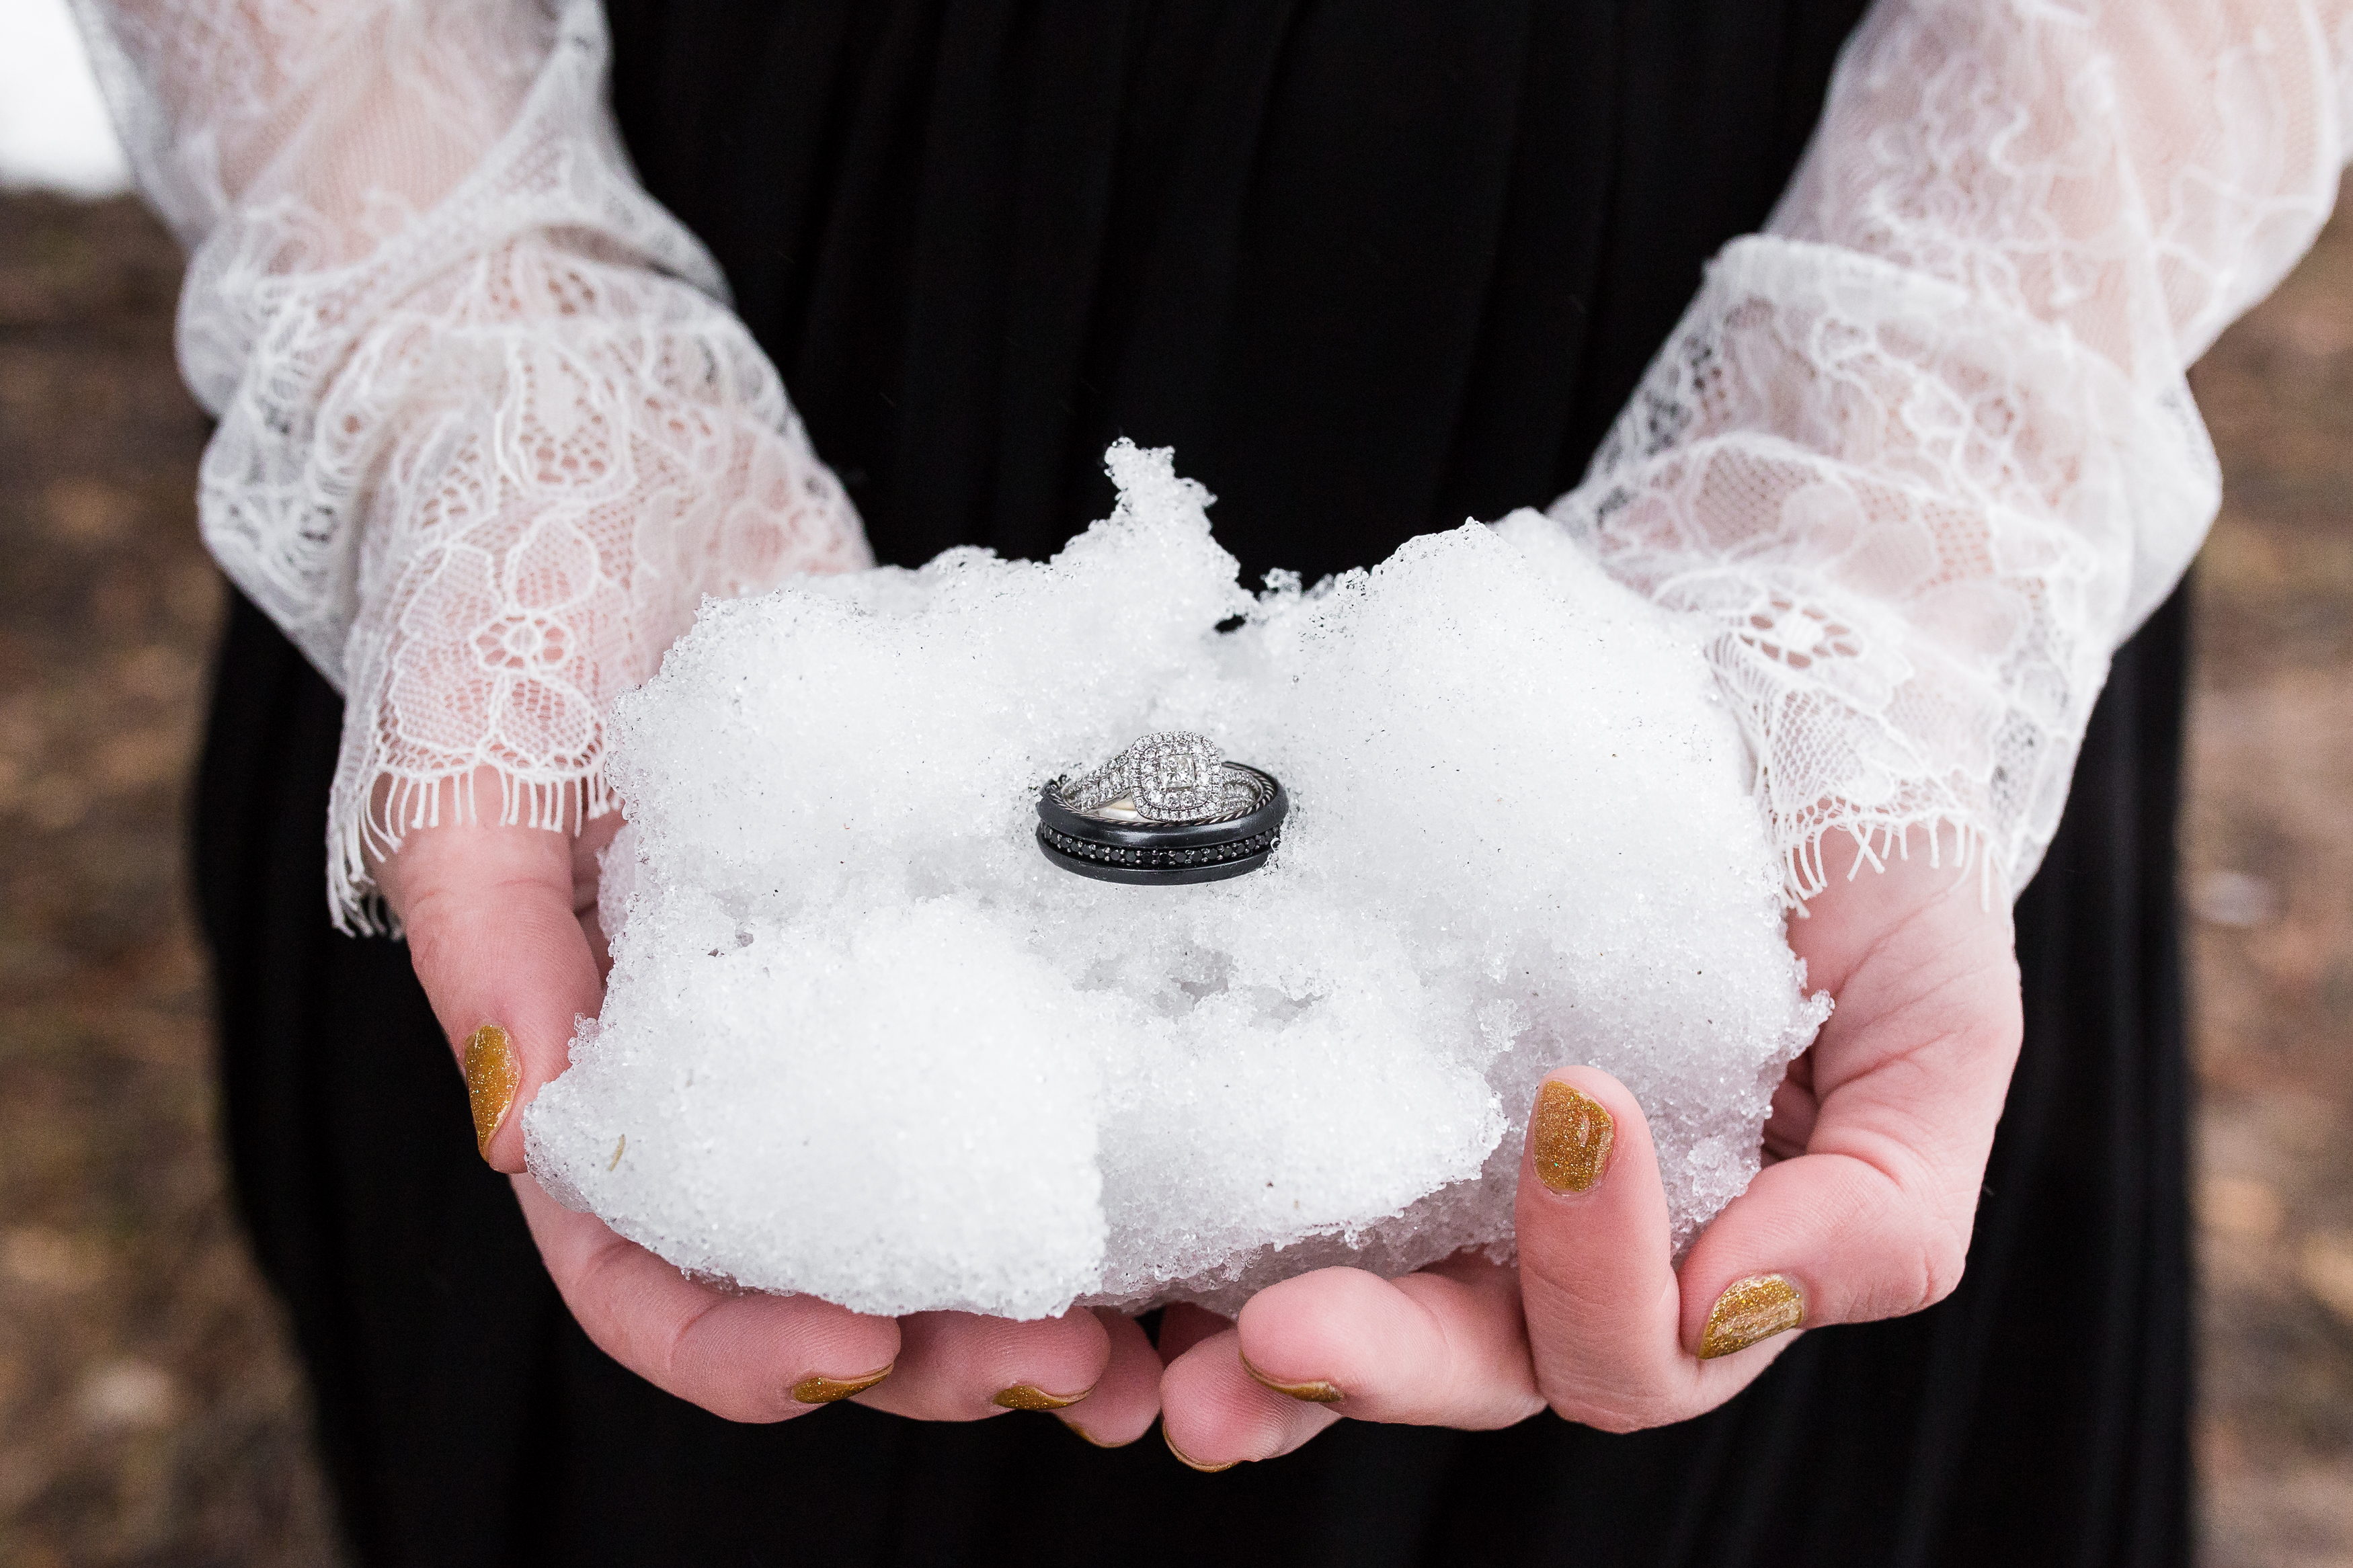 Wedding ring suite in hands holding snowball